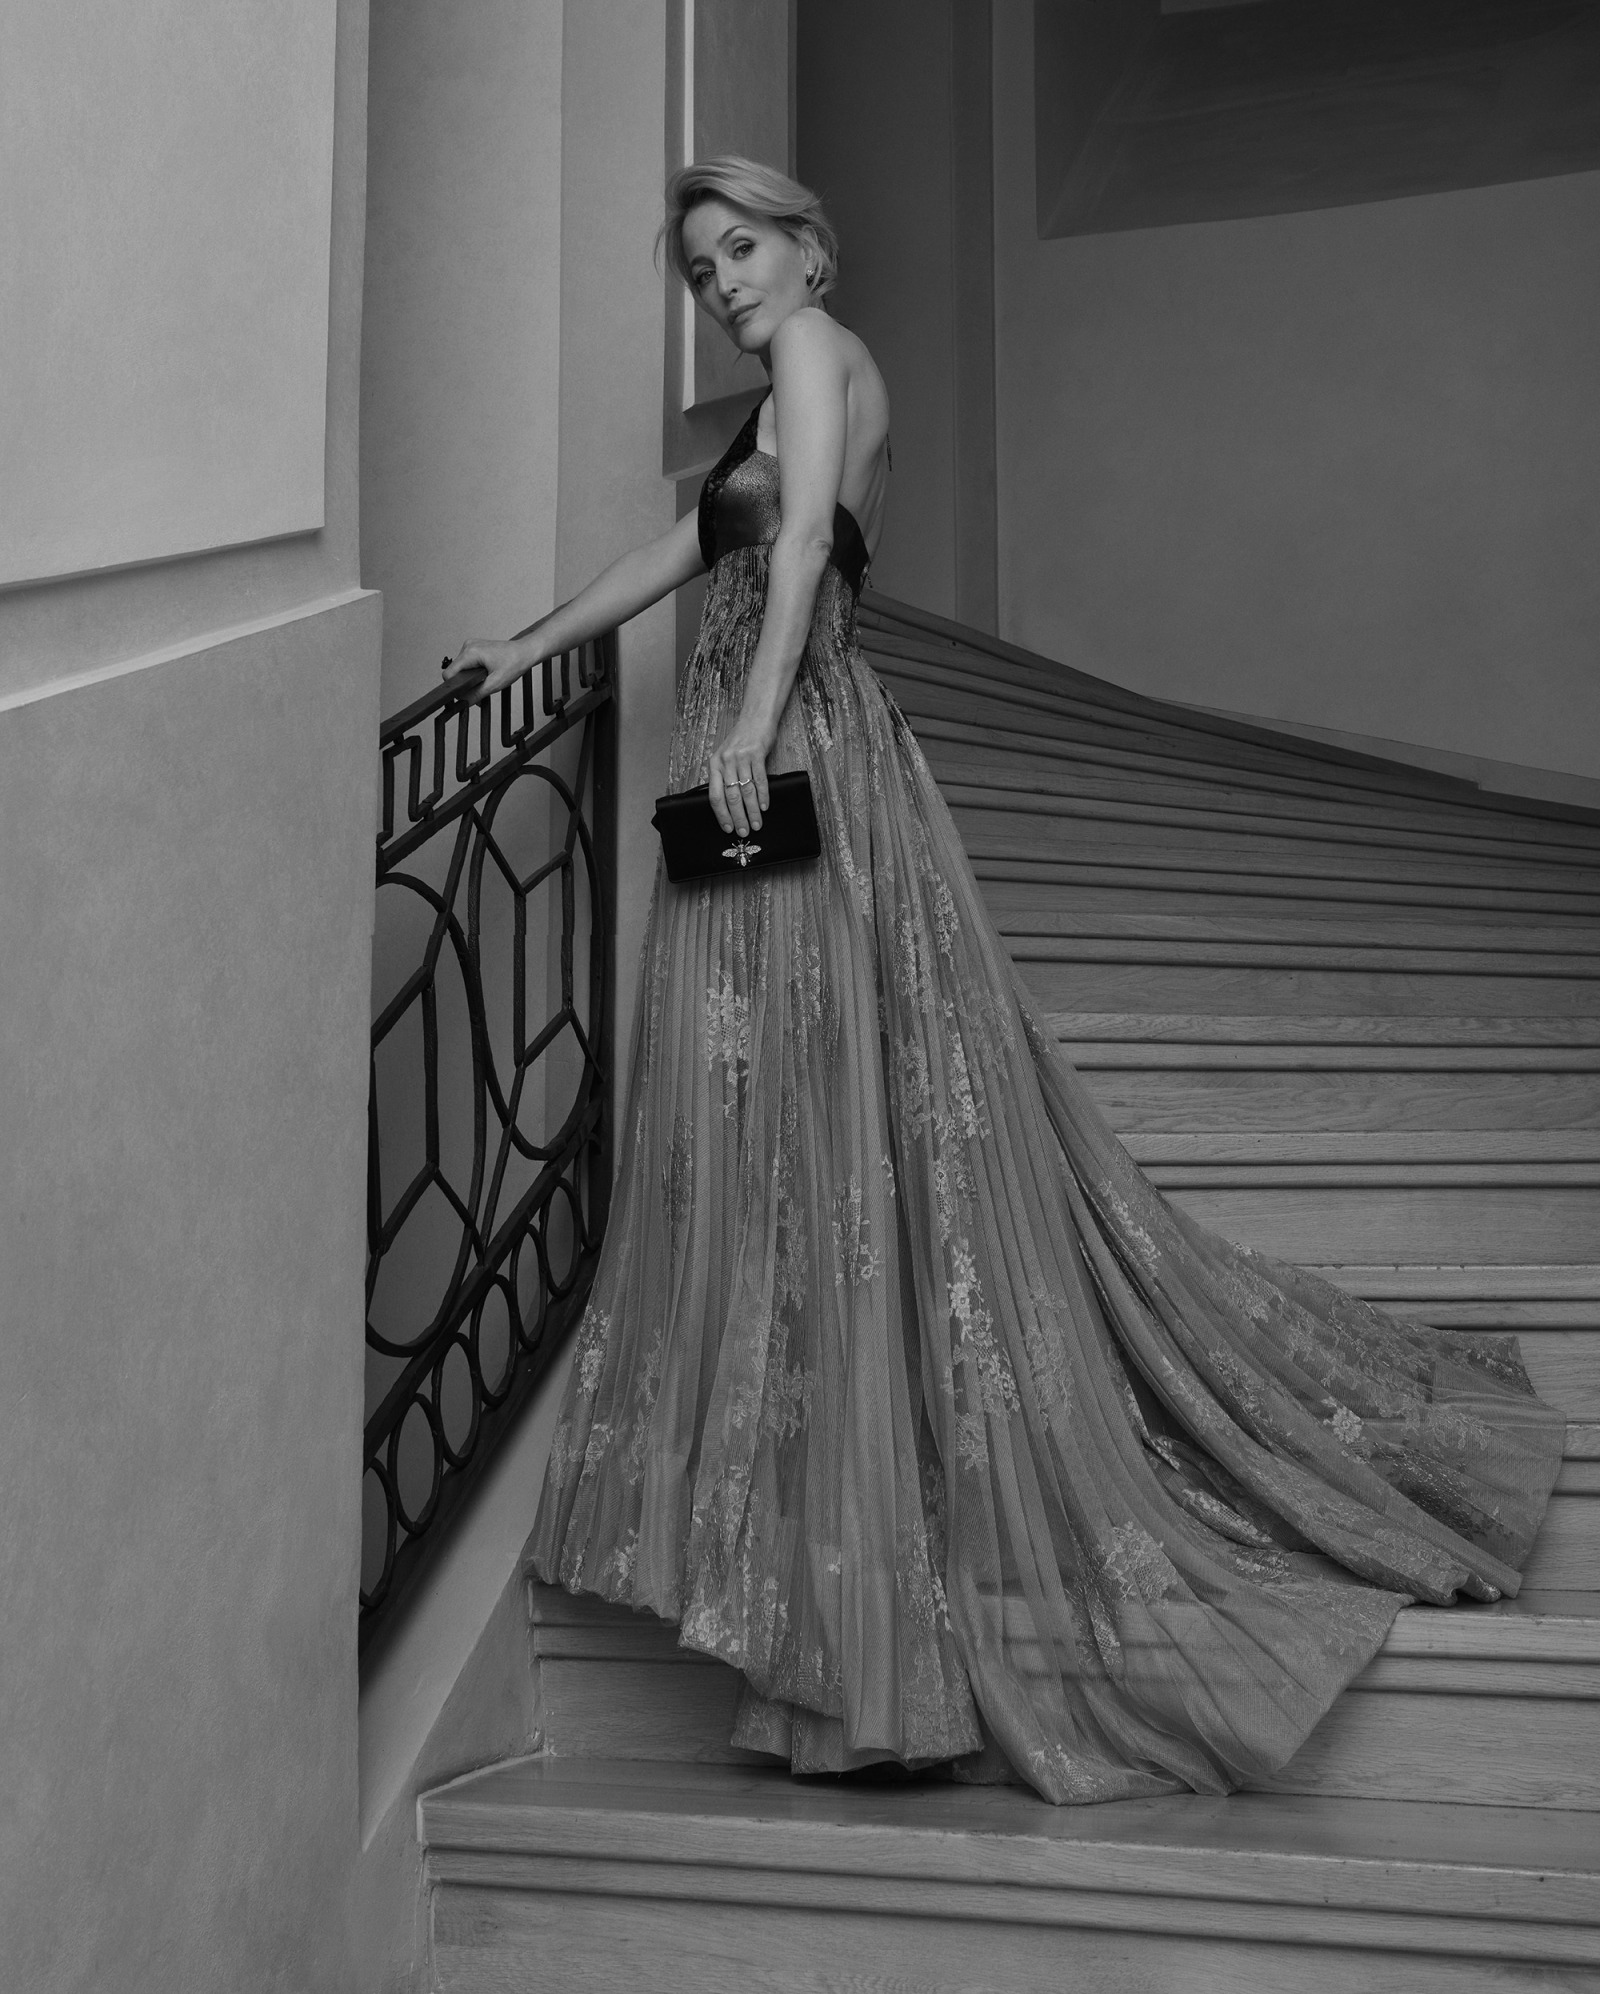 DIOR by Andreas ORTNER